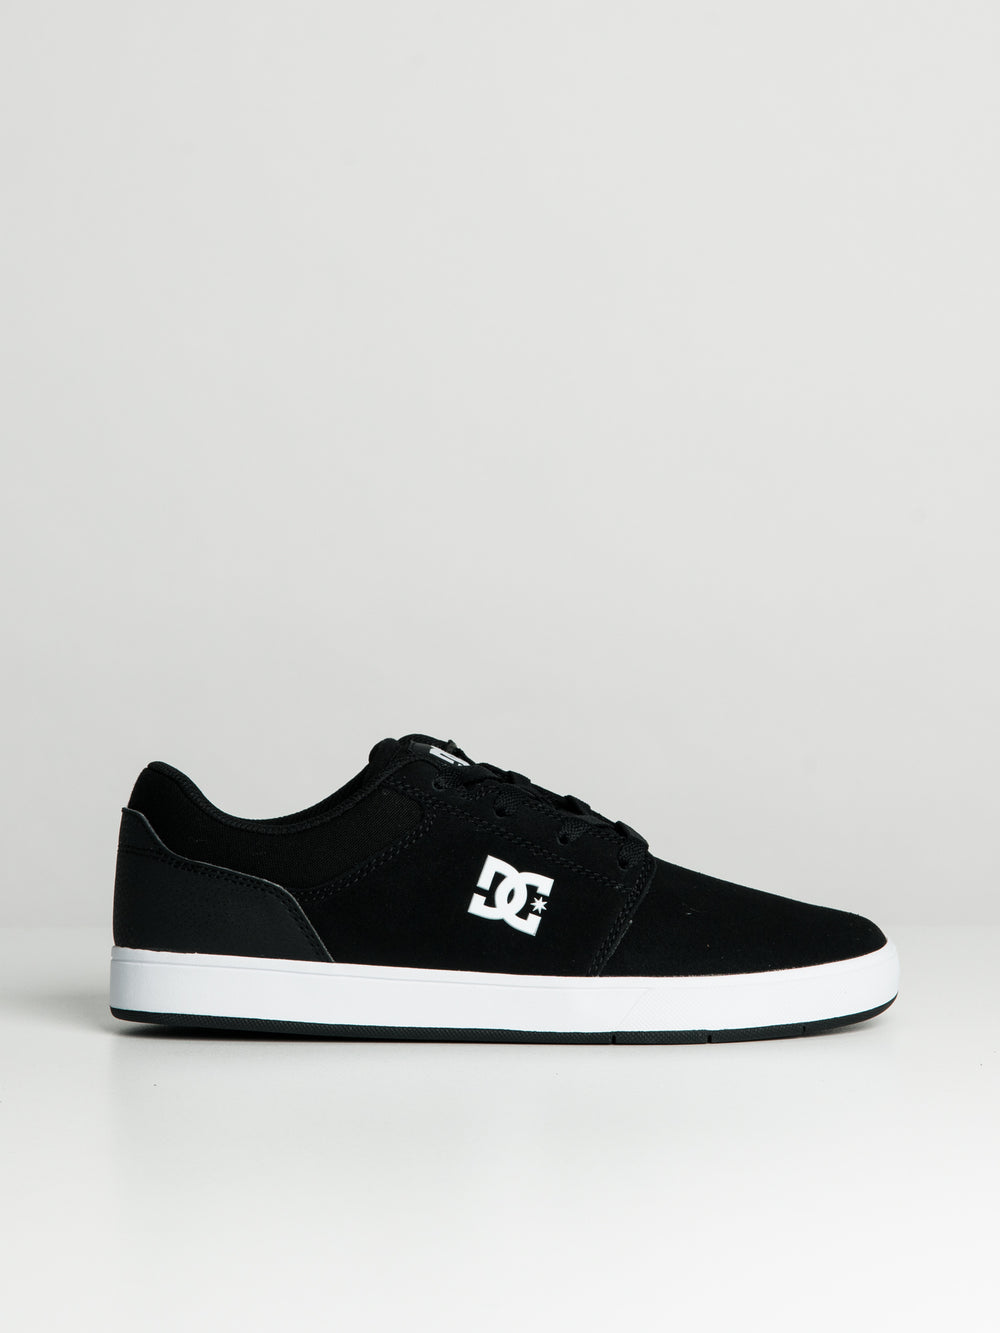 MENS DC SHOES CRISIS 2 SNEAKER - CLEARANCE